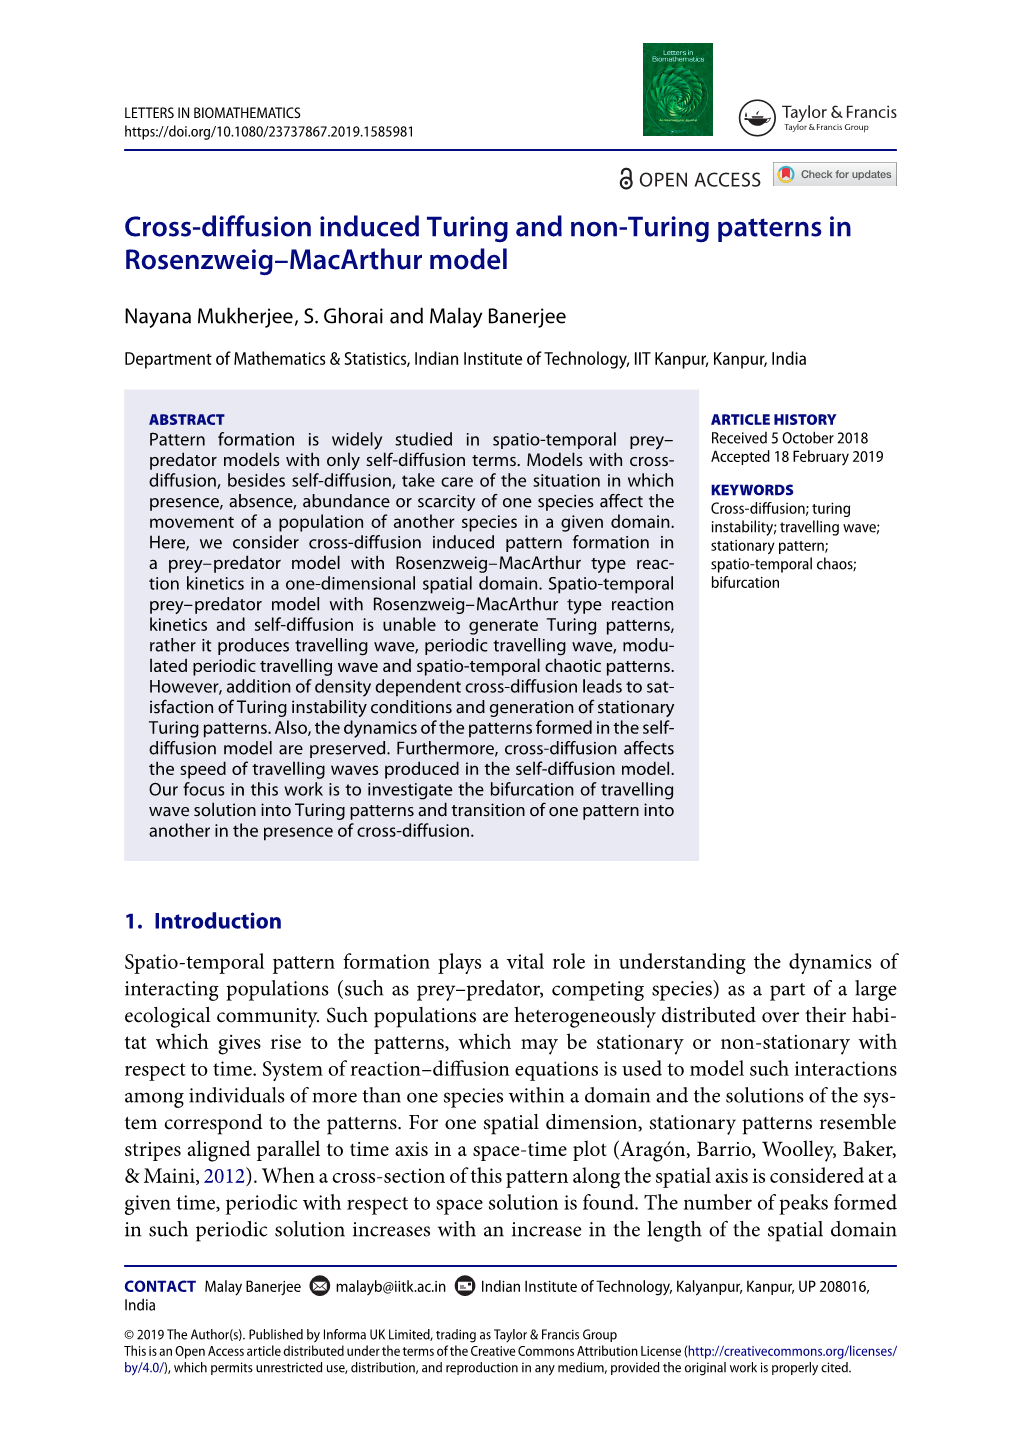 Cross-Diffusion Induced Turing and Non-Turing Patterns in Rosenzweig–Macarthur Model